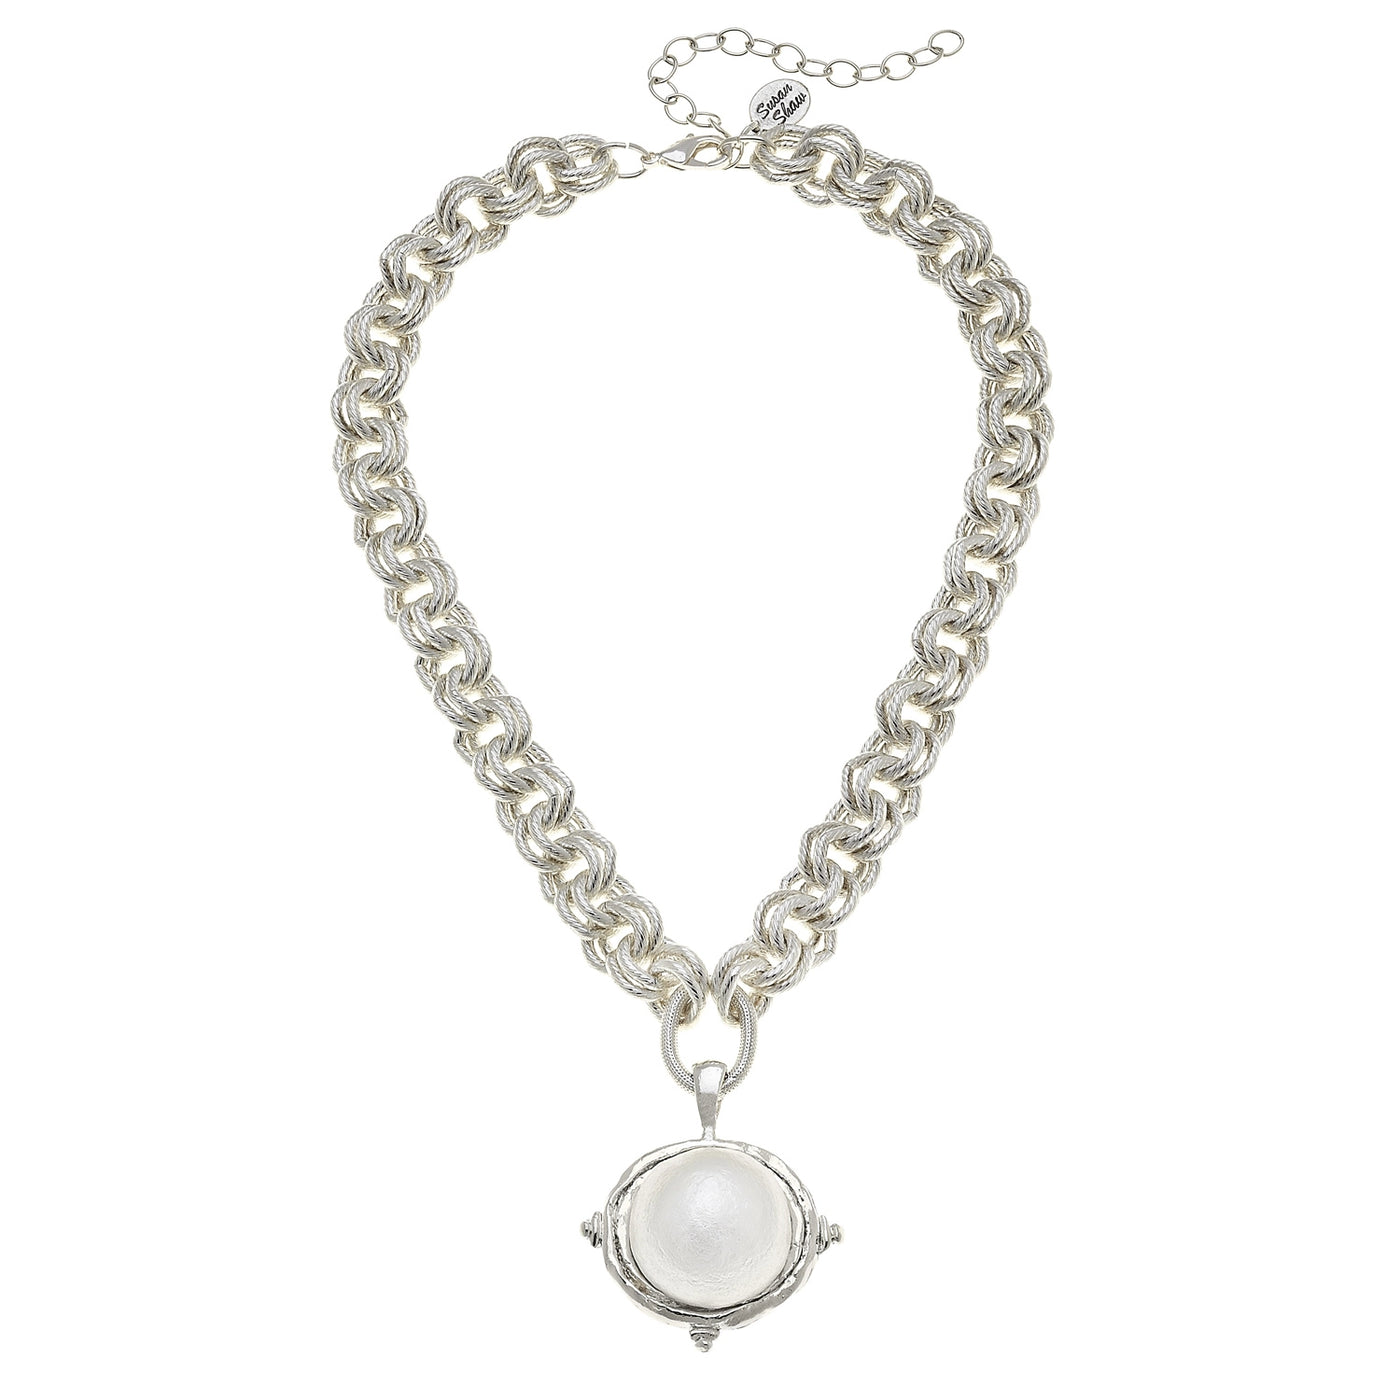 Double chainlink necklace with three studded silver drop pendant and accent pearl